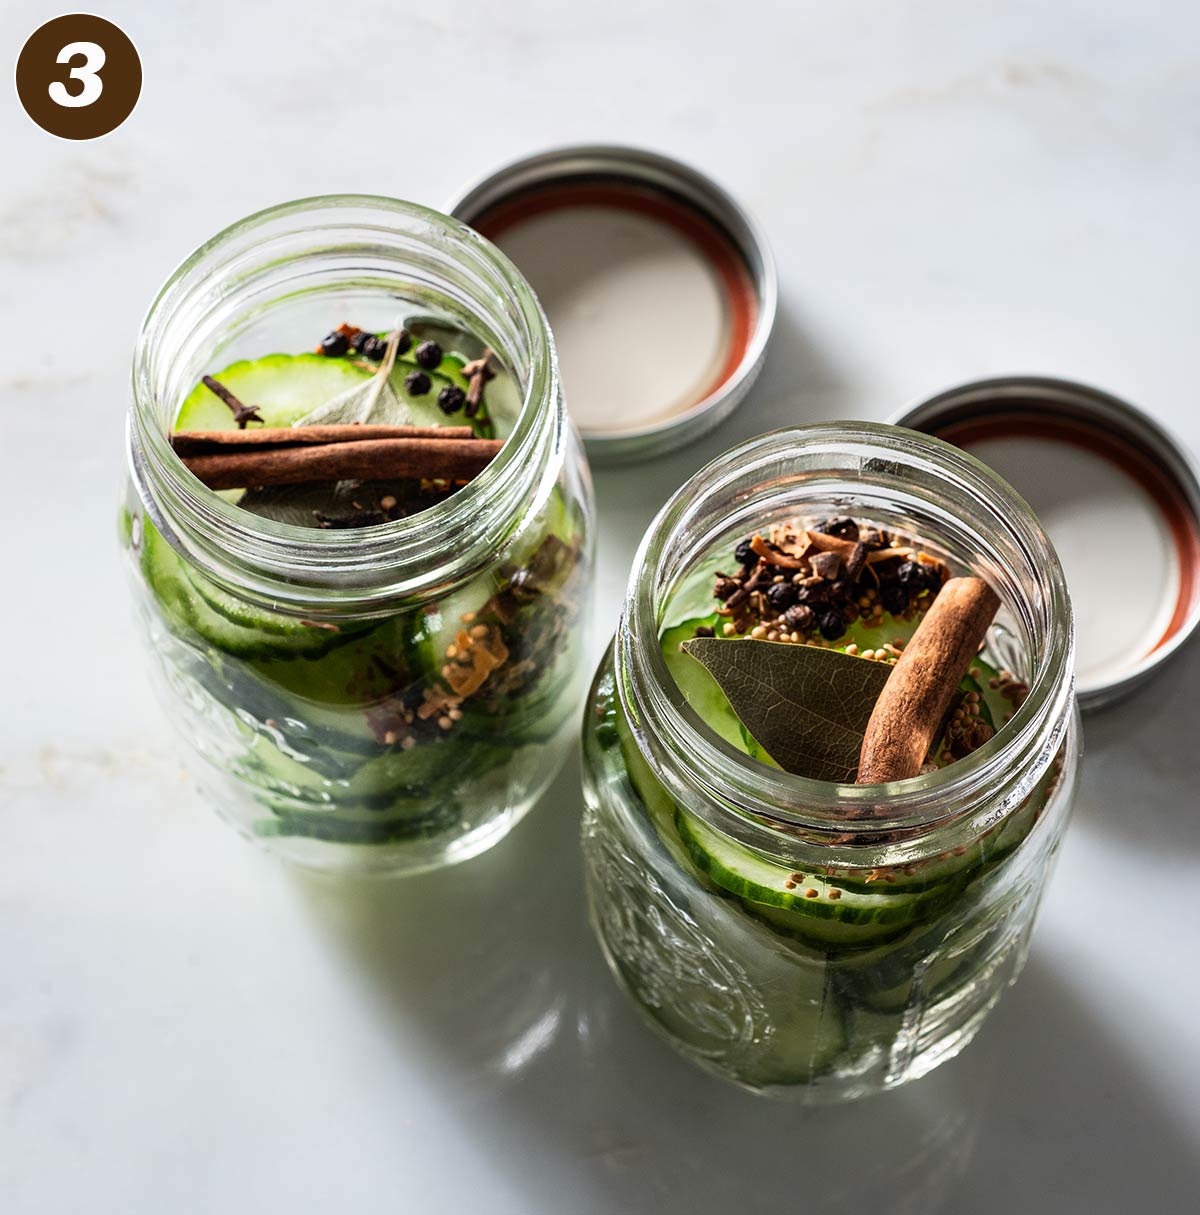 Two jars filled with cucumber slices and spices.